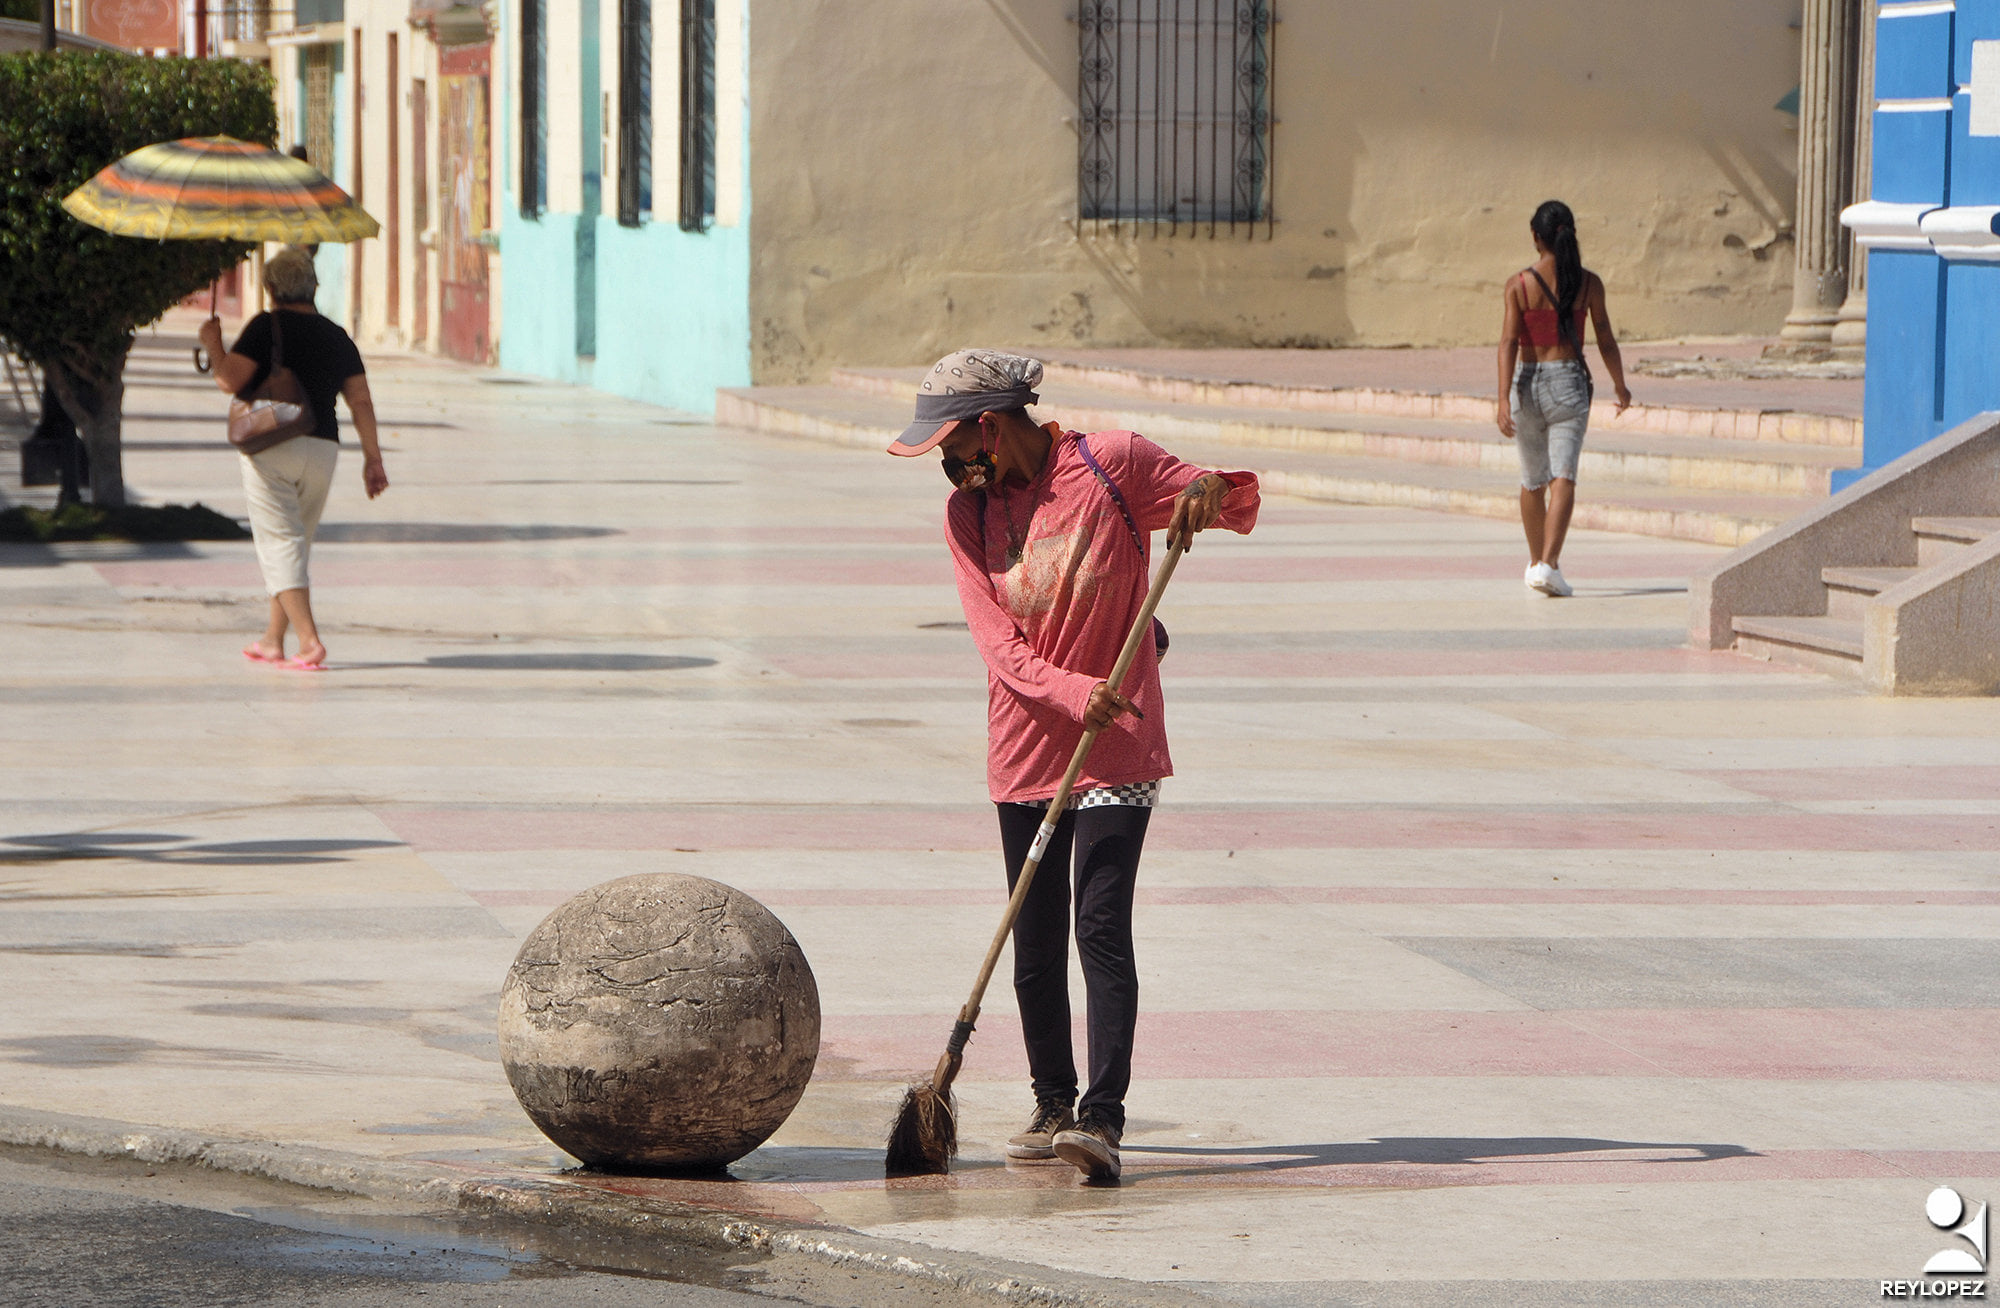 Las Tunas wants to be a very clean city again